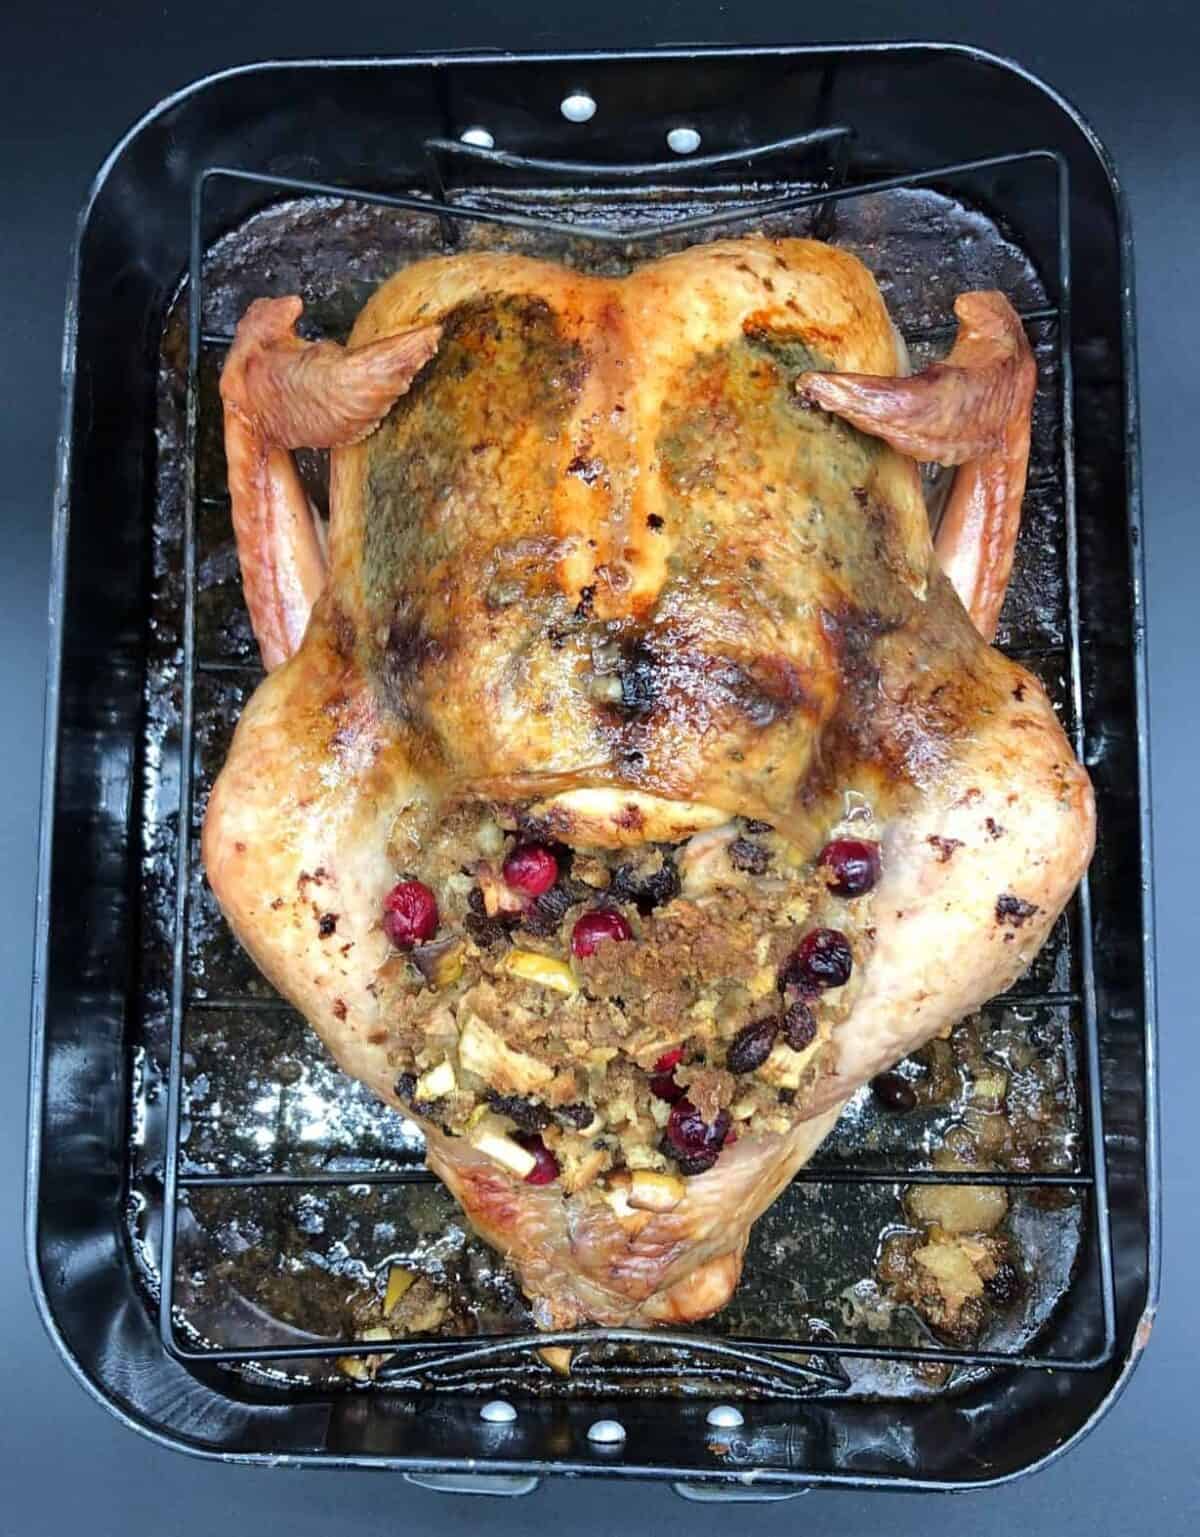 Finished turkey in roasting pan.